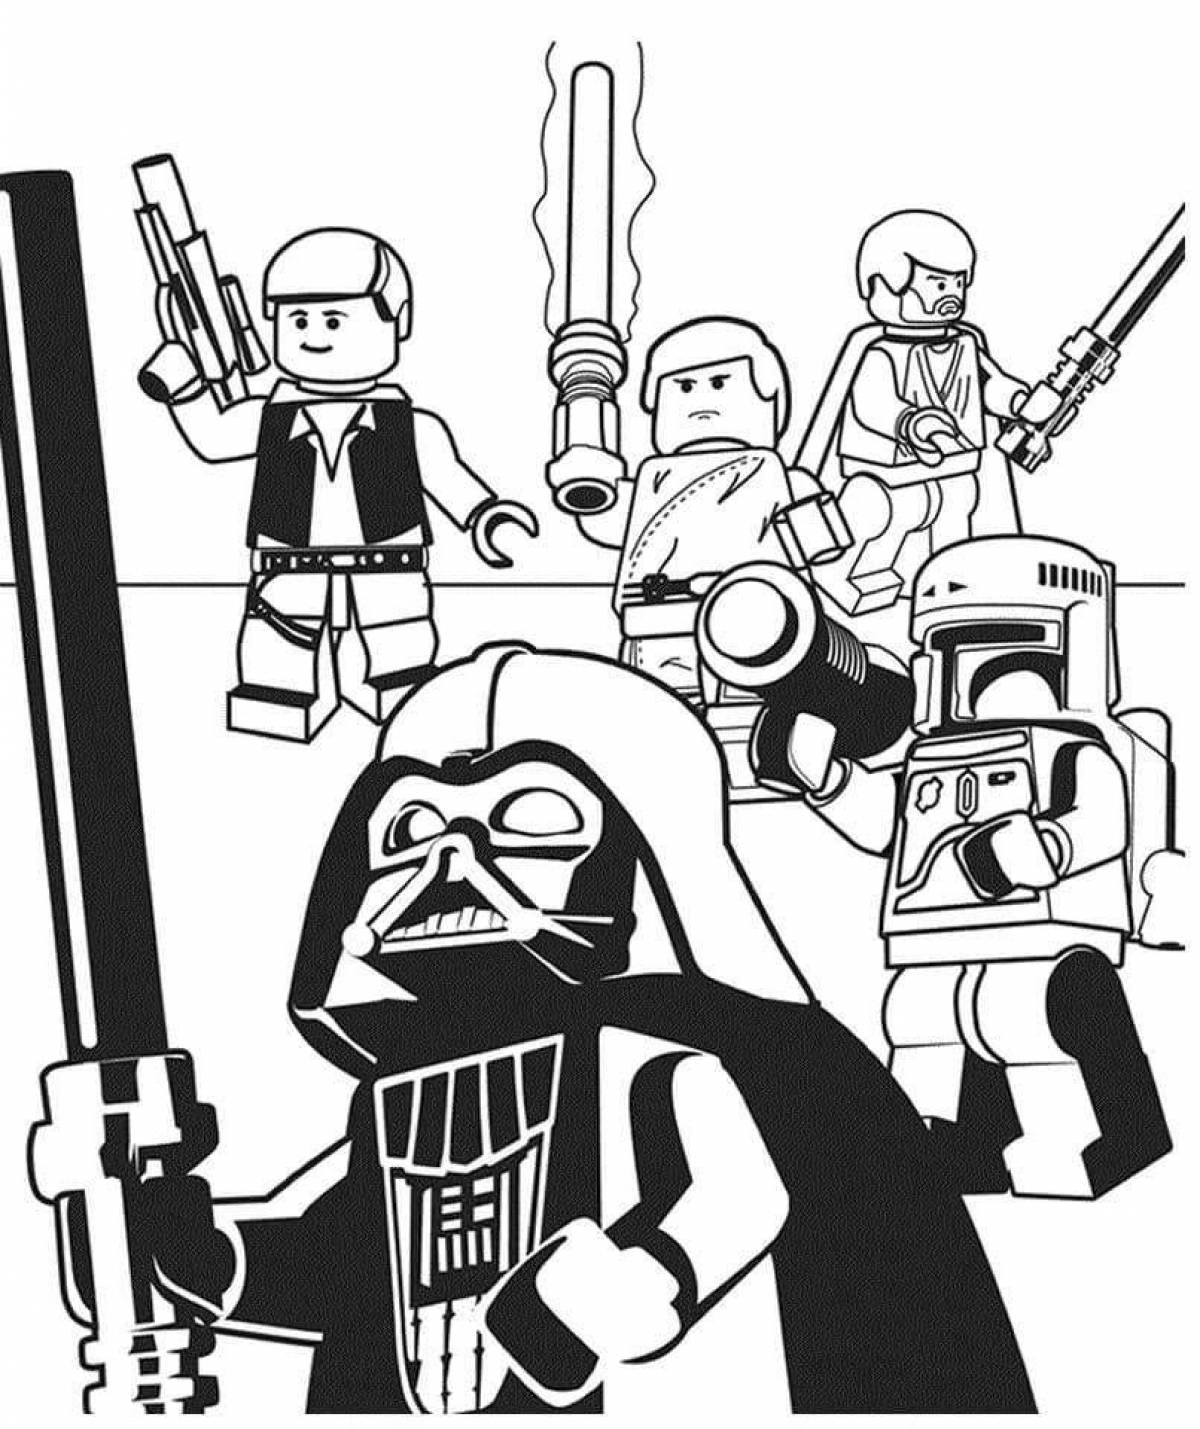 Great lego star wars coloring book